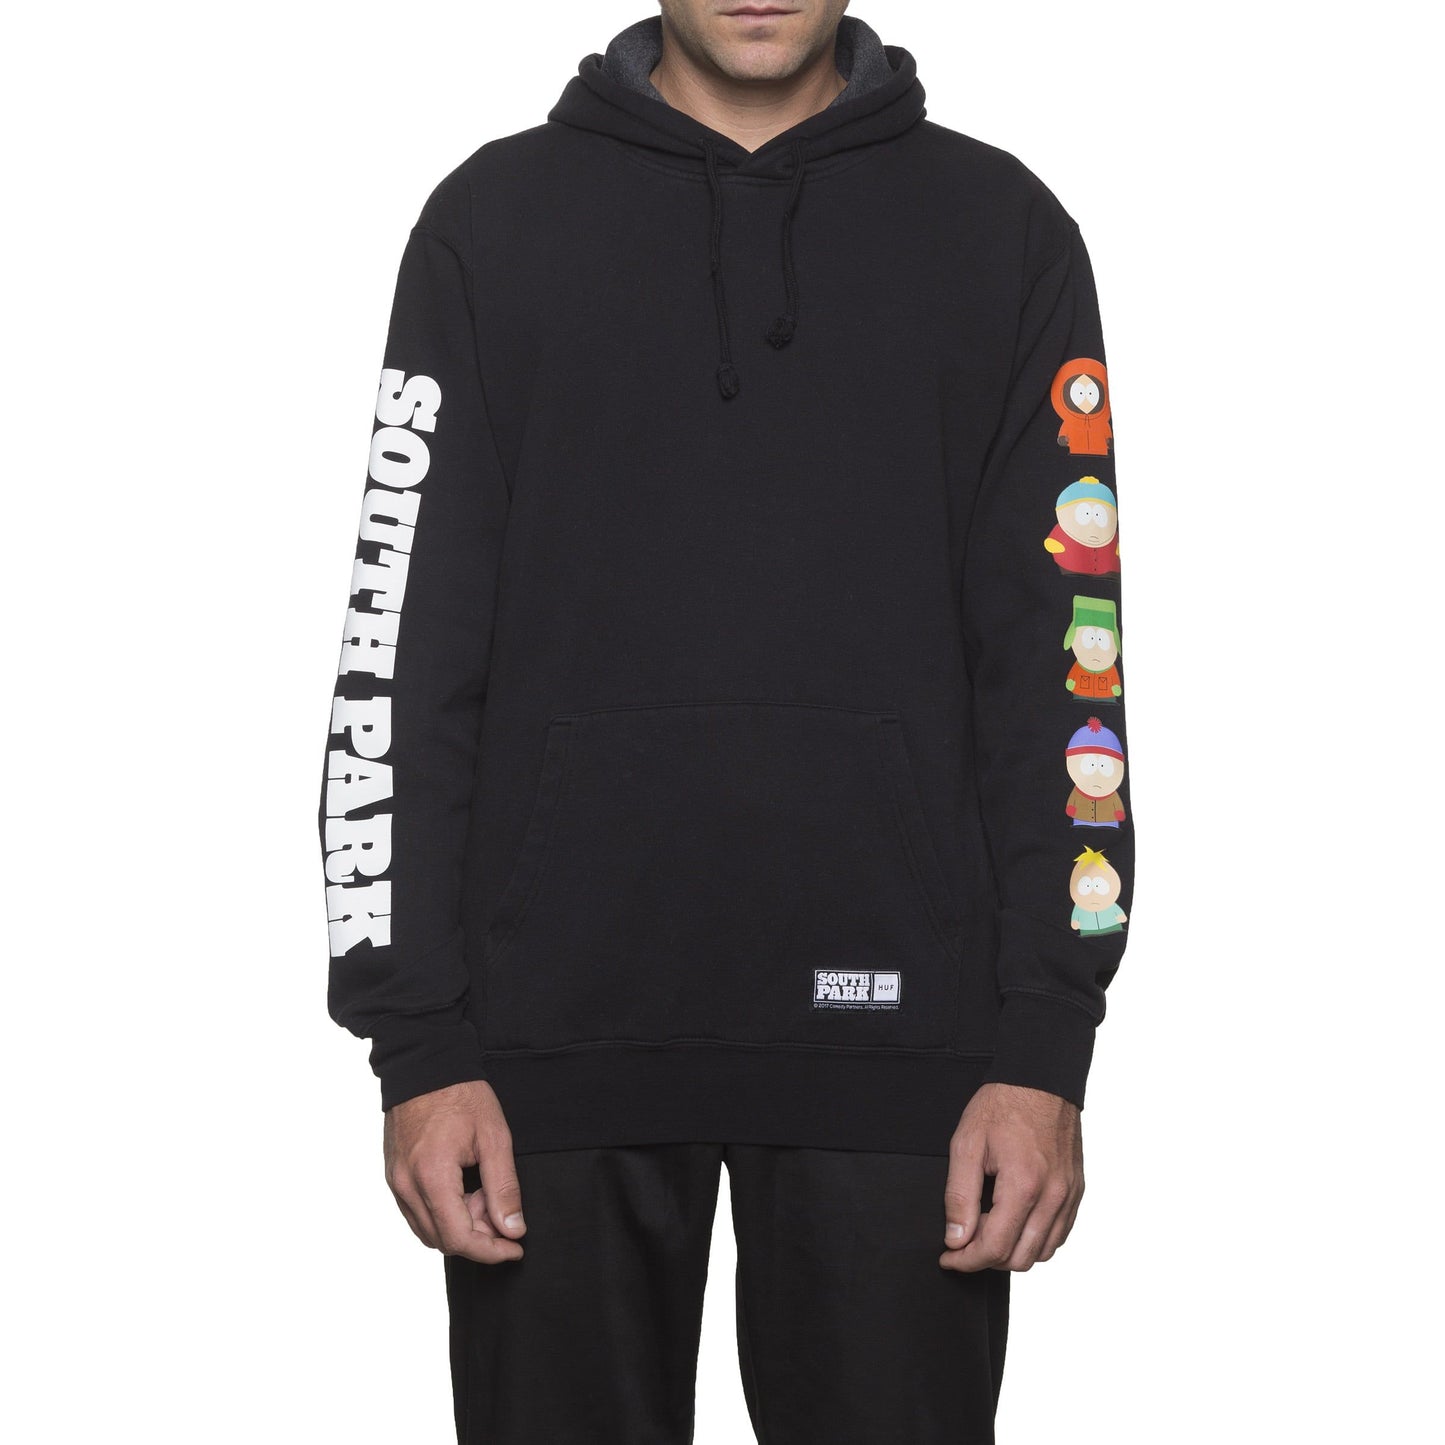 HUF x South Park Men's Pullover Hoodie, Black - The Giant Peach